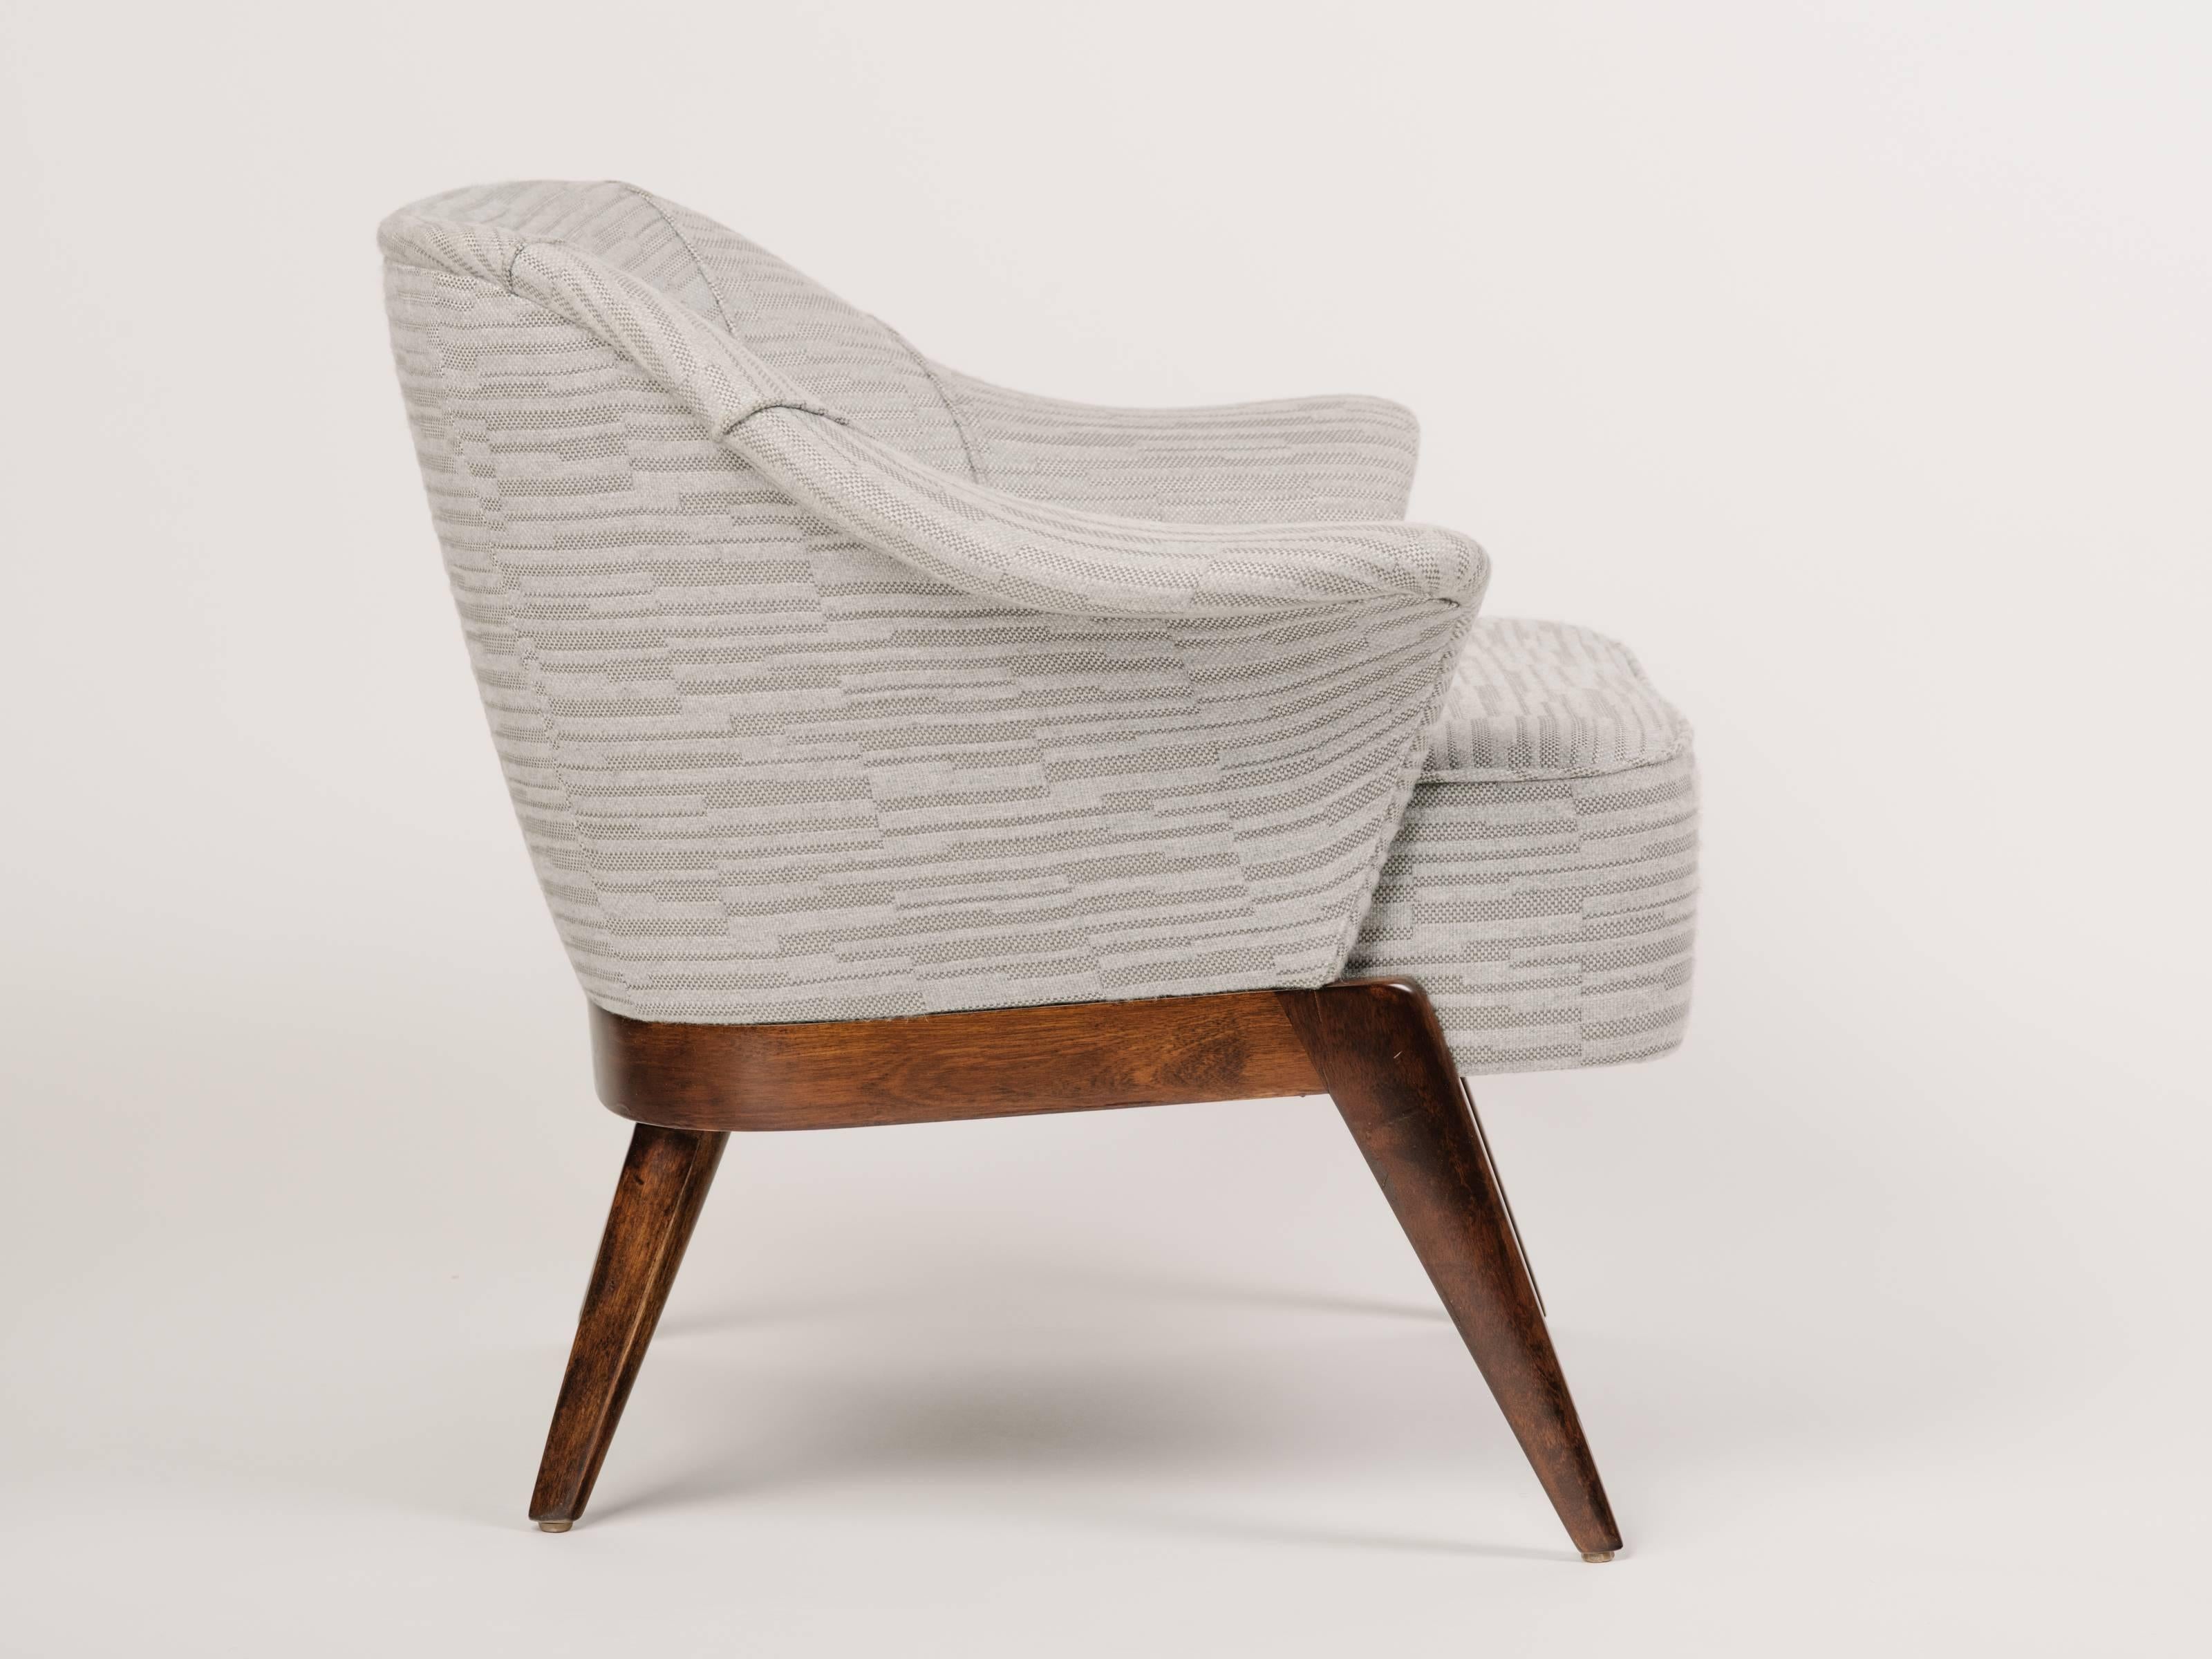 Outstanding Mid-Century Modern armchair with sculptural form. The chair has barrel form with winged swan sides and striking maple wood frame in walnut. Newly restored and upholstered in woven and embossed cotton-wool fabric with geometric pattern in